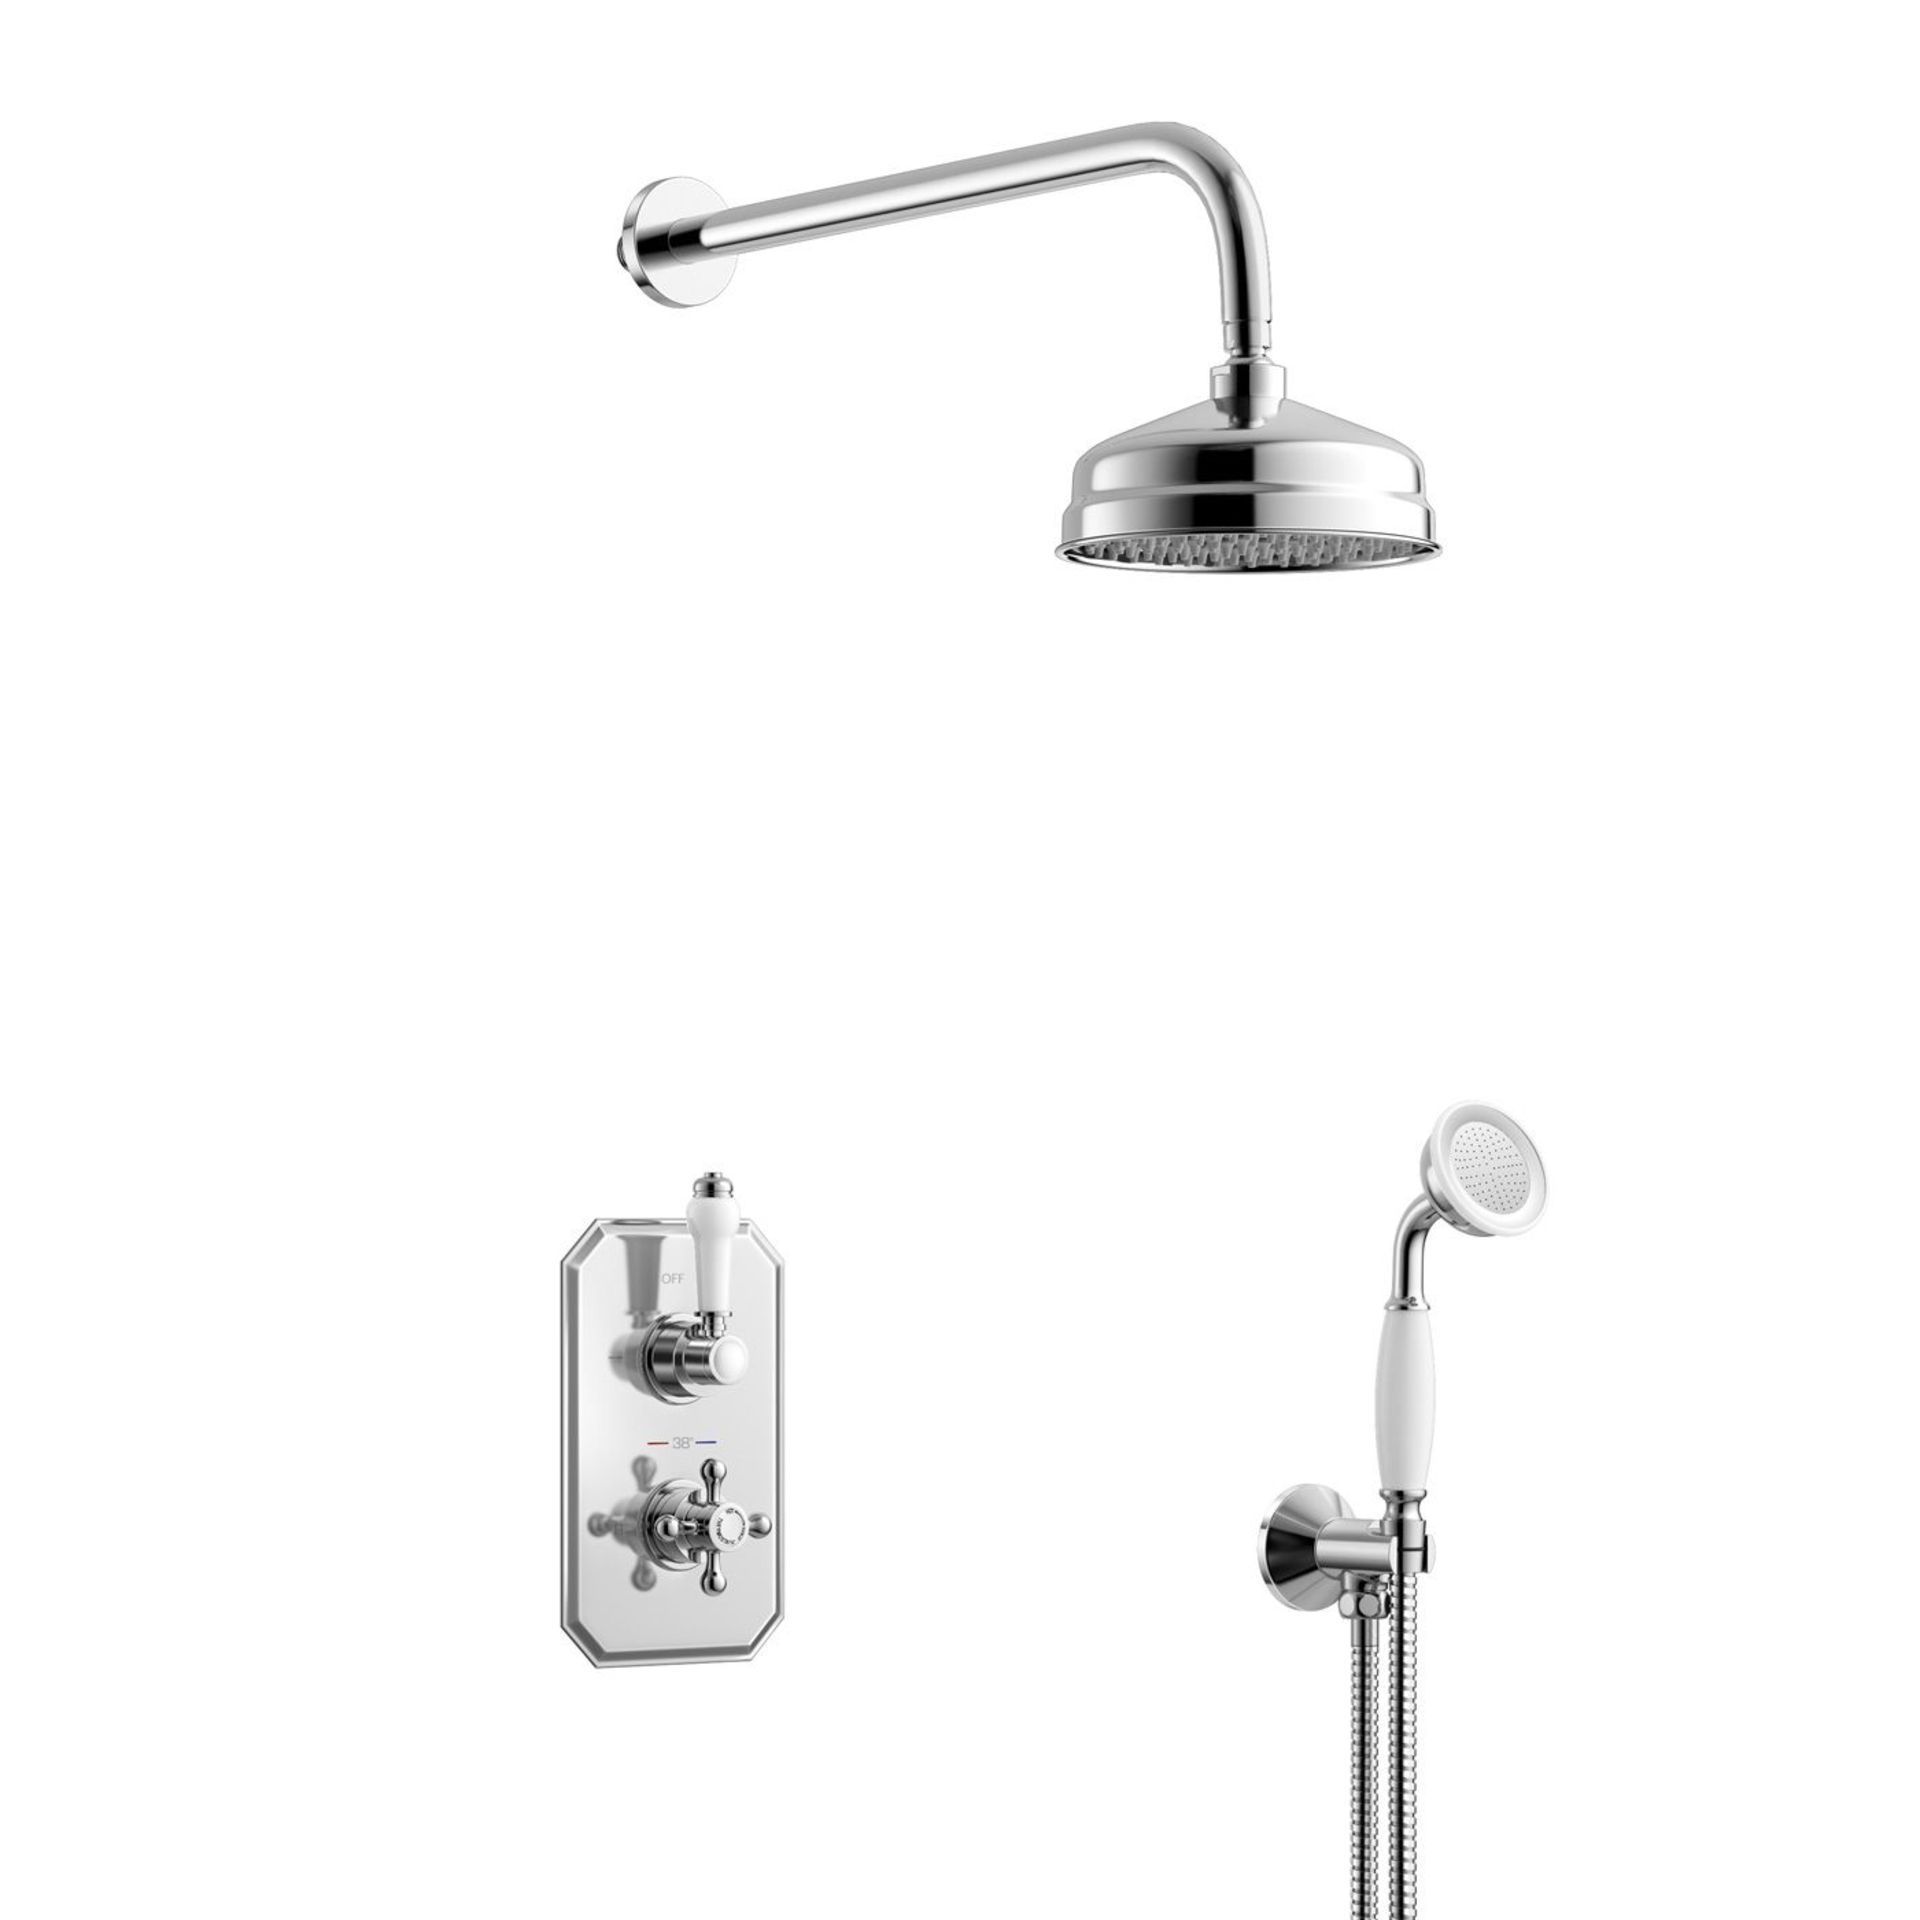 New & Boxed 150mm Traditional Stainless Steel Wall Mounted Head, Rail Kit. RRP £511.99.Ss2Wctr... - Image 2 of 3